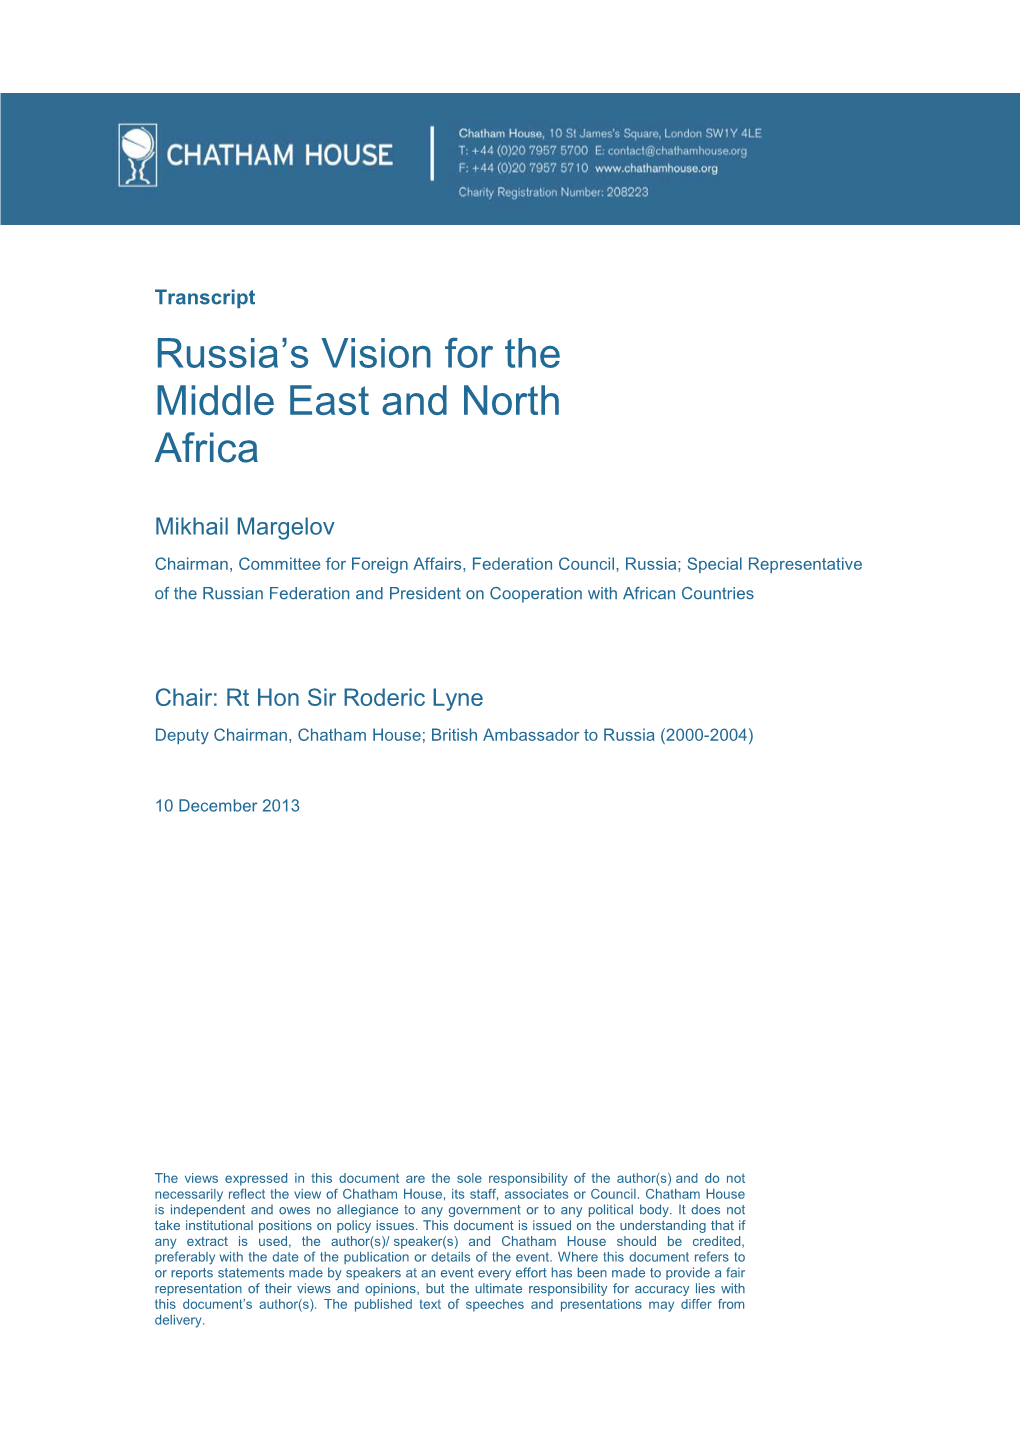 Russia's Vision for the Middle East and North Africa